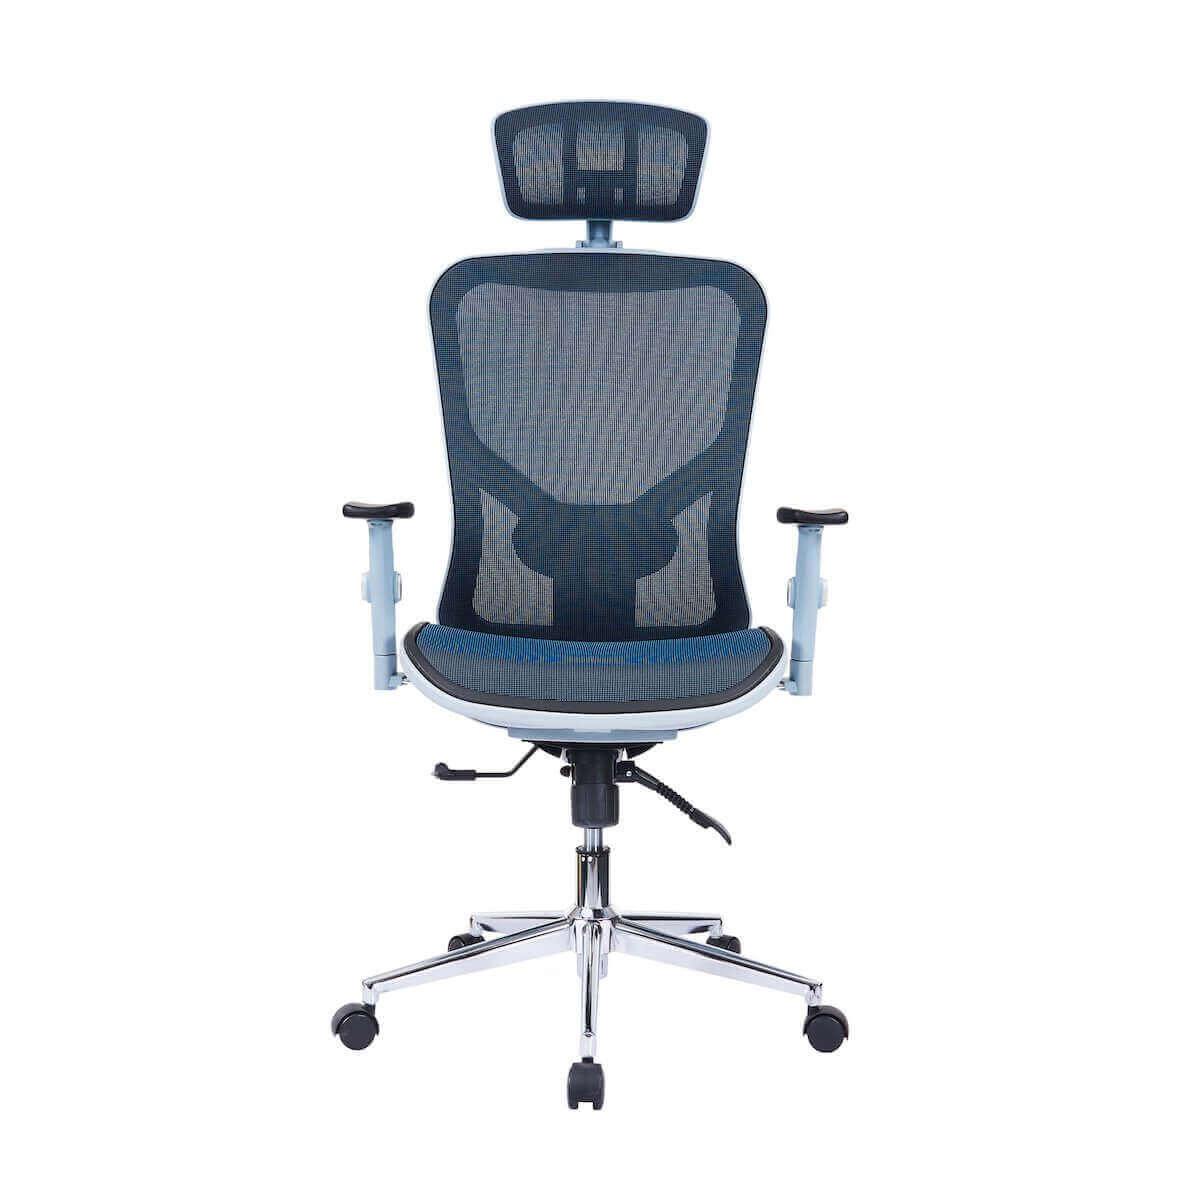 Techni Mobili Blue High Back Executive Mesh Office Chair with Arms, Headrest, and Lumbar Support RTA-1008-BL